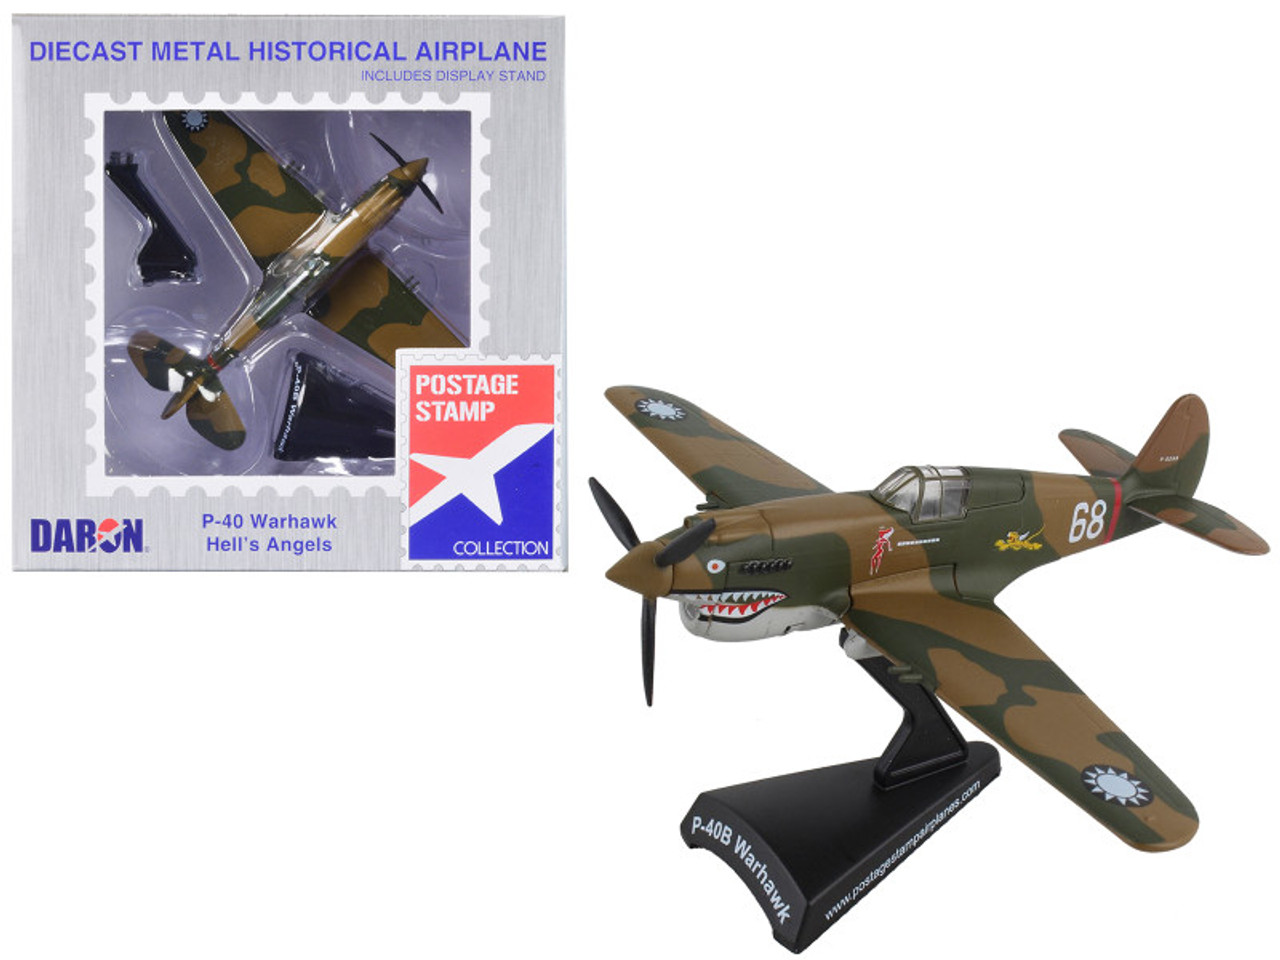 Curtiss P-40 Warhawk Fighter Aircraft "Hell's Angels - Flying Tigers" United States Army Air Corps 1/90 Diecast Model Airplane by Postage Stamp